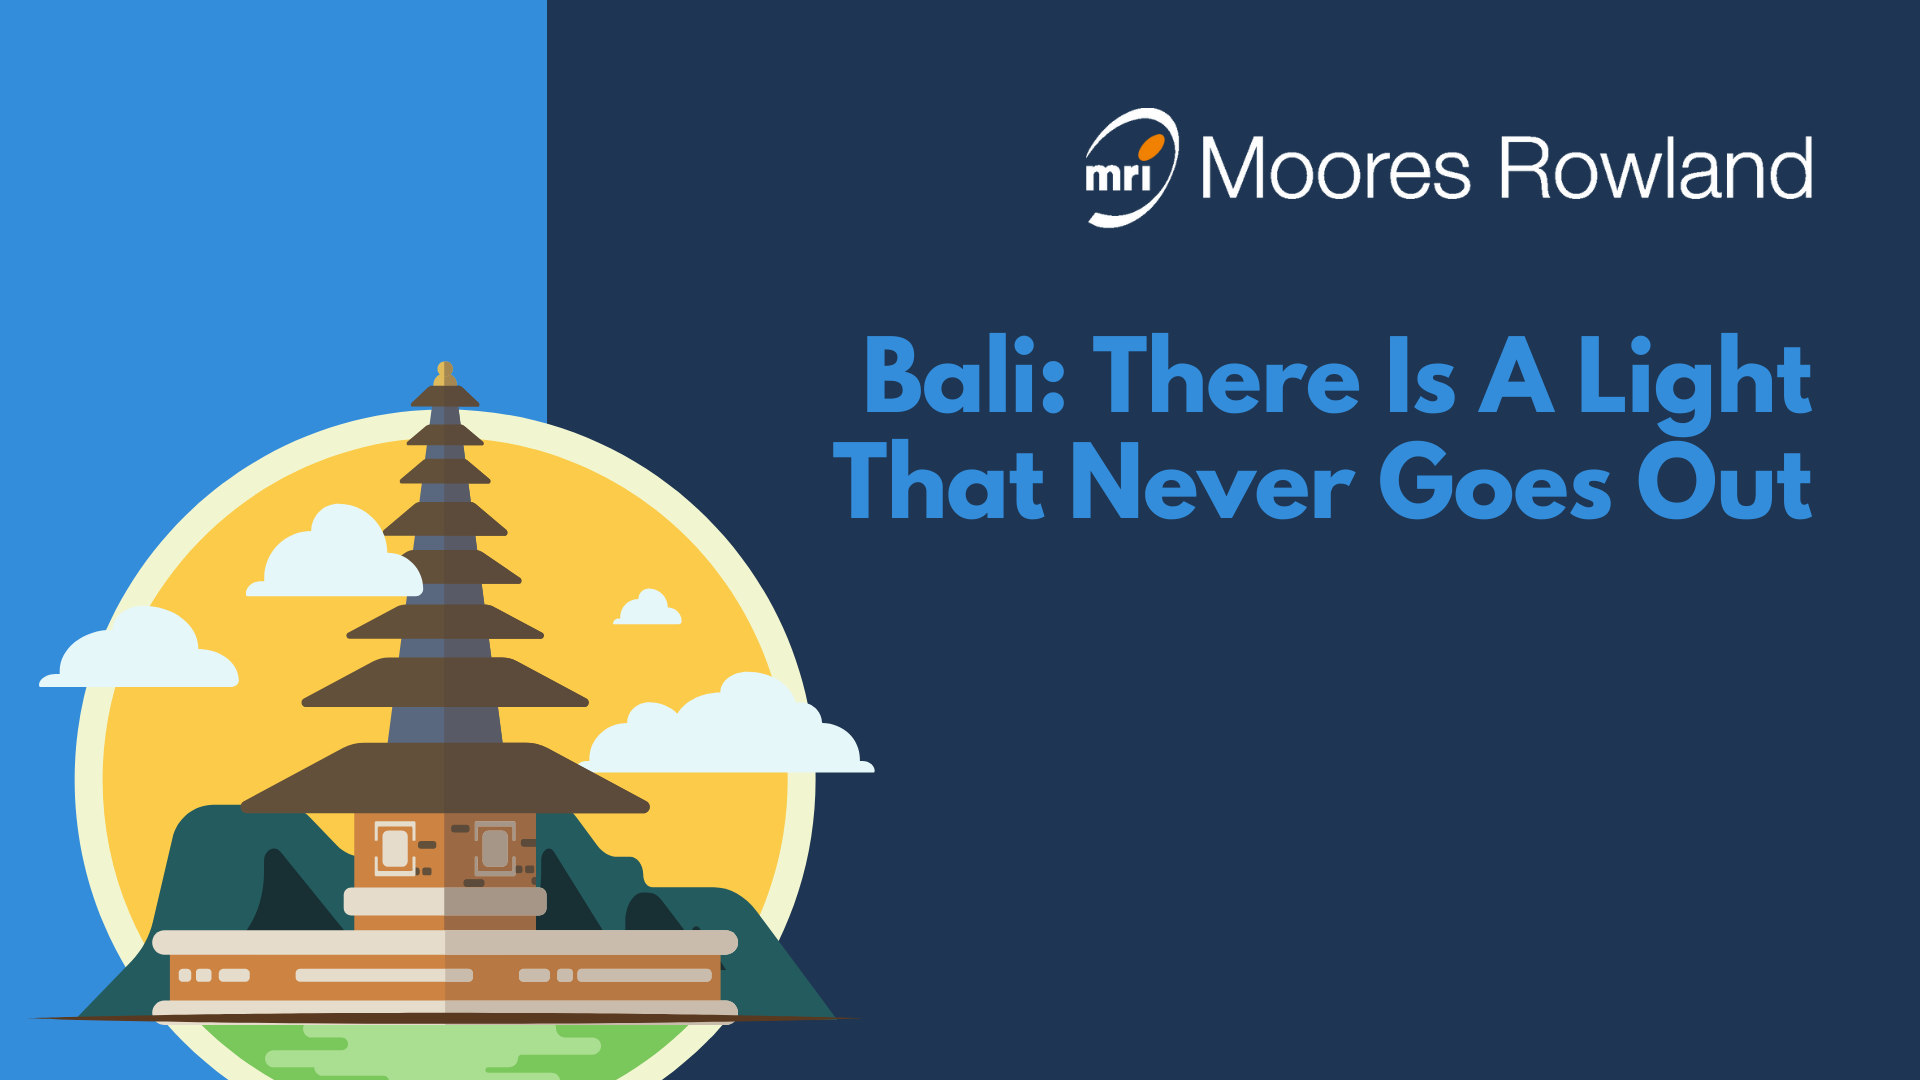 Bali: There Is A Light That Never Goes Out